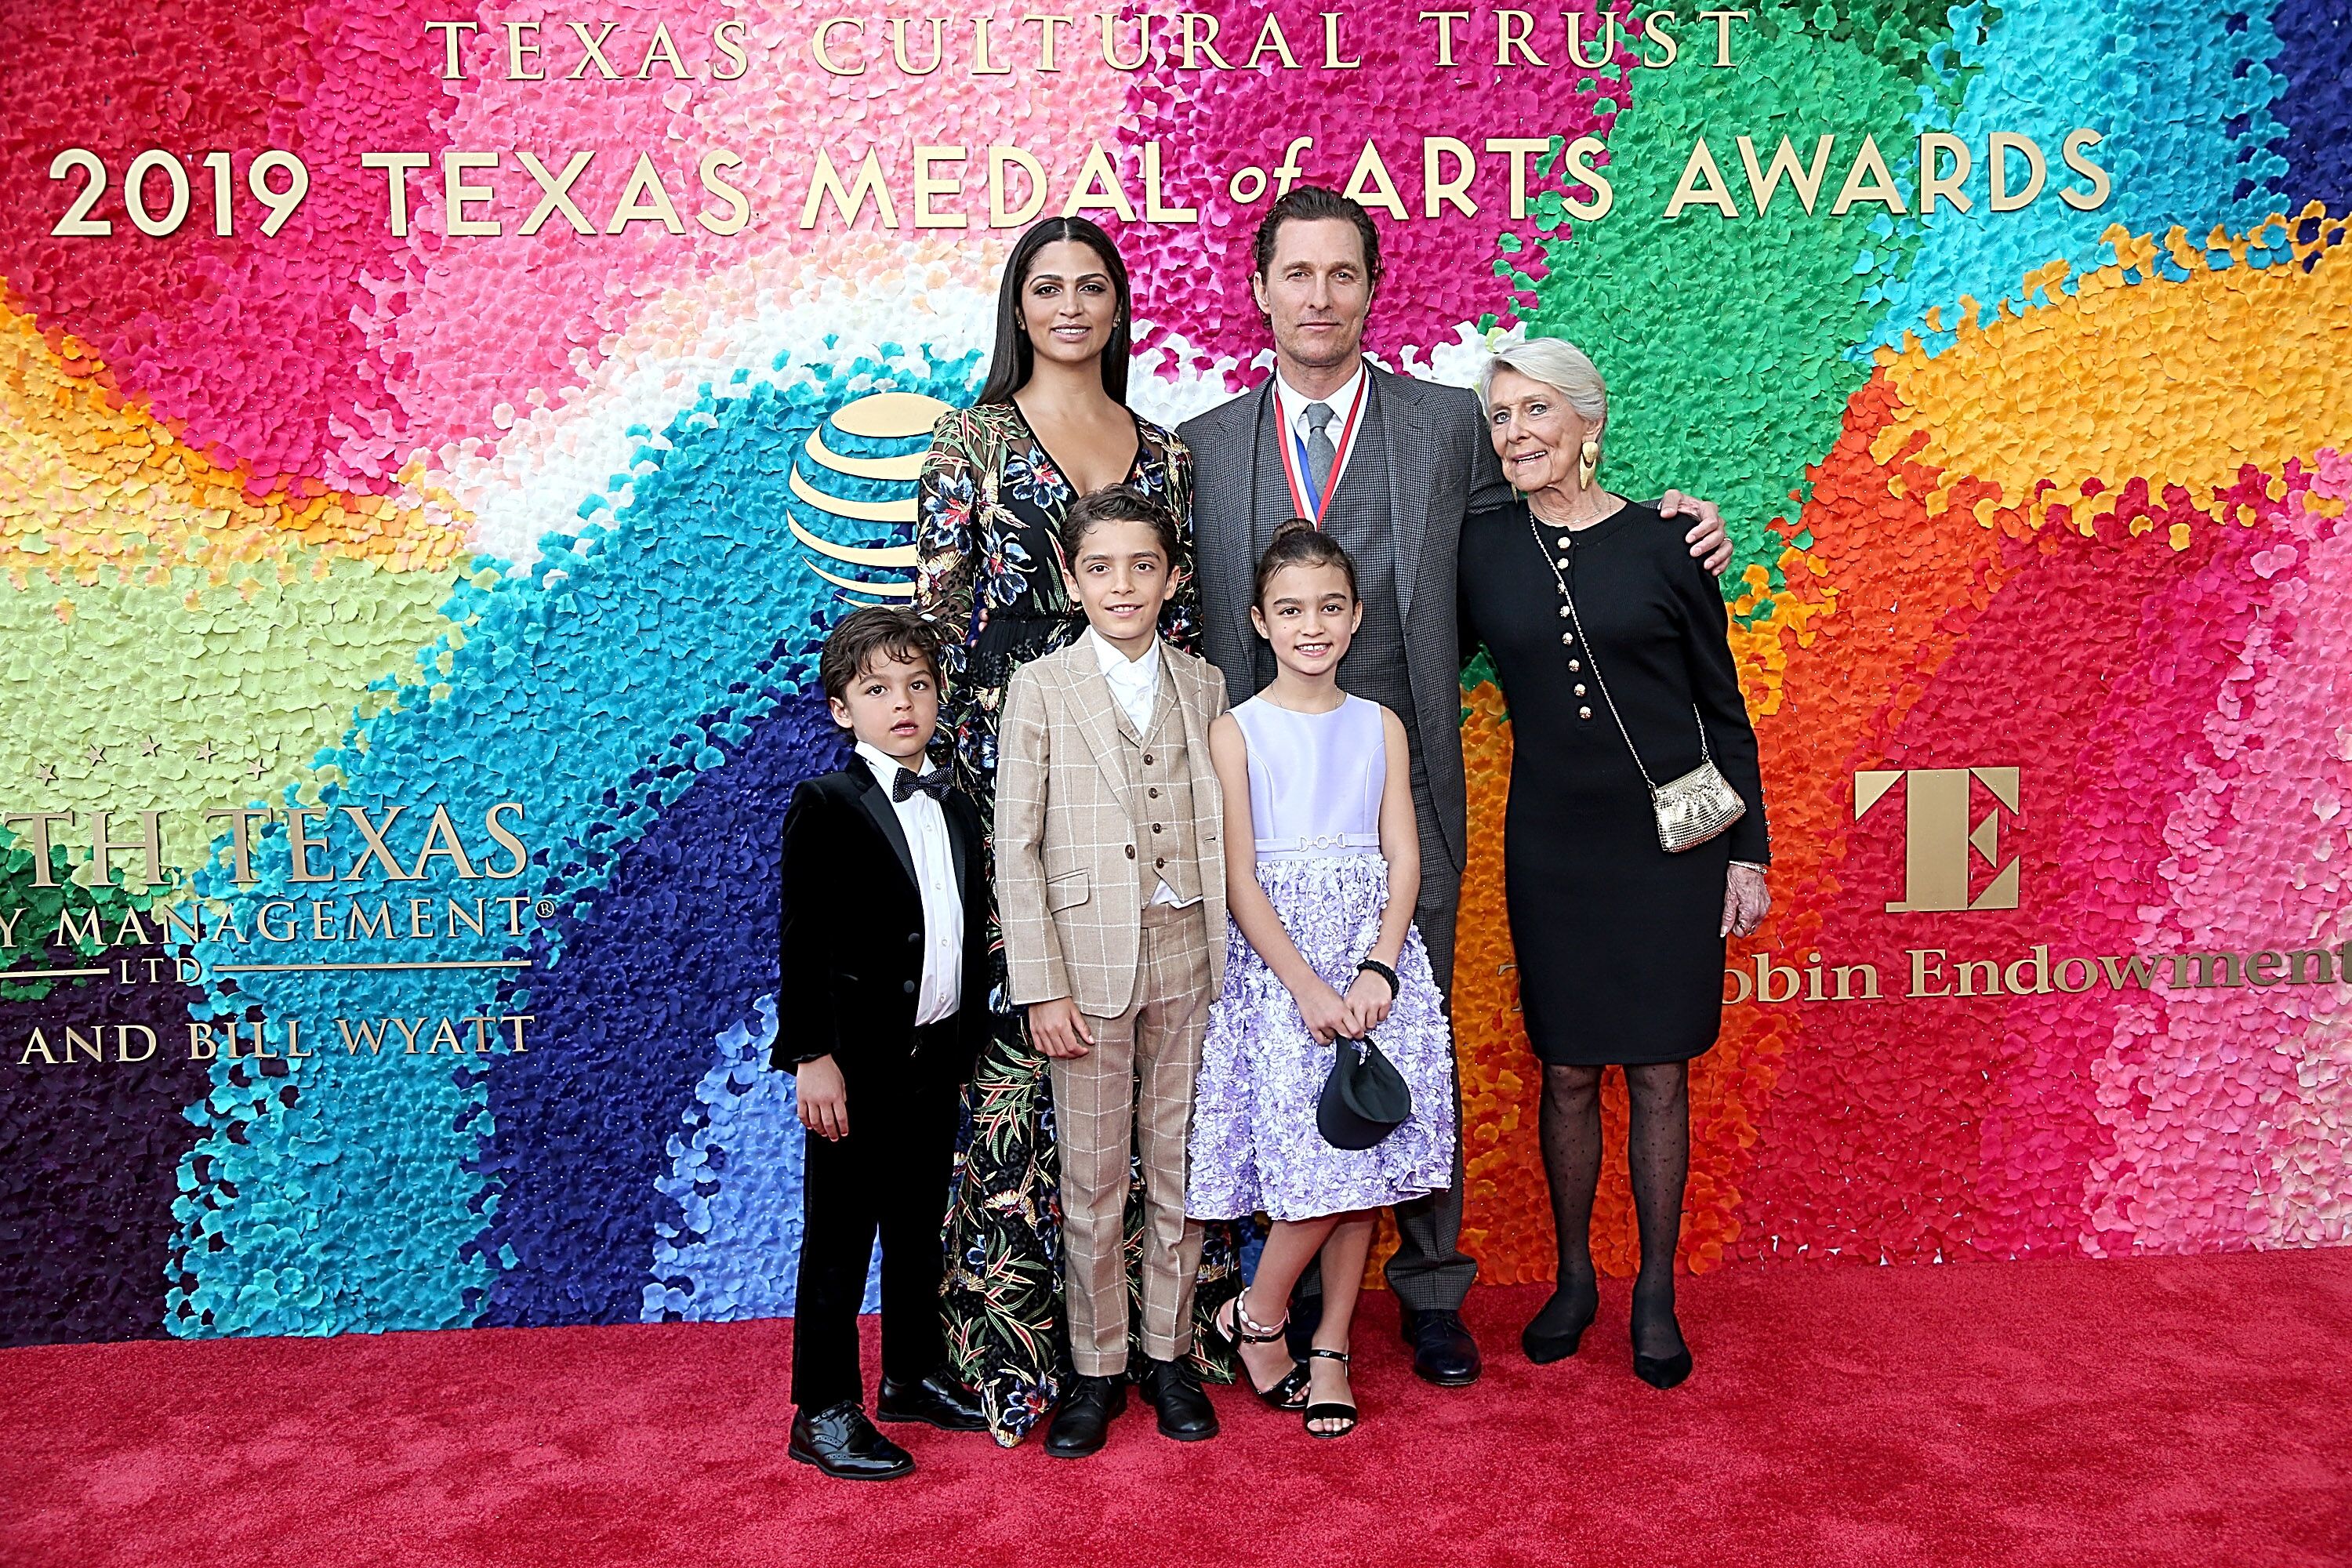 Matthew McConaughey,wife Camila Alves, their children and his mother Kay McConaughey attend the Texas Medal Of Arts Awards at the Long Center for the Performing Arts in Austin, Texas in 2019 | Source: Getty Images